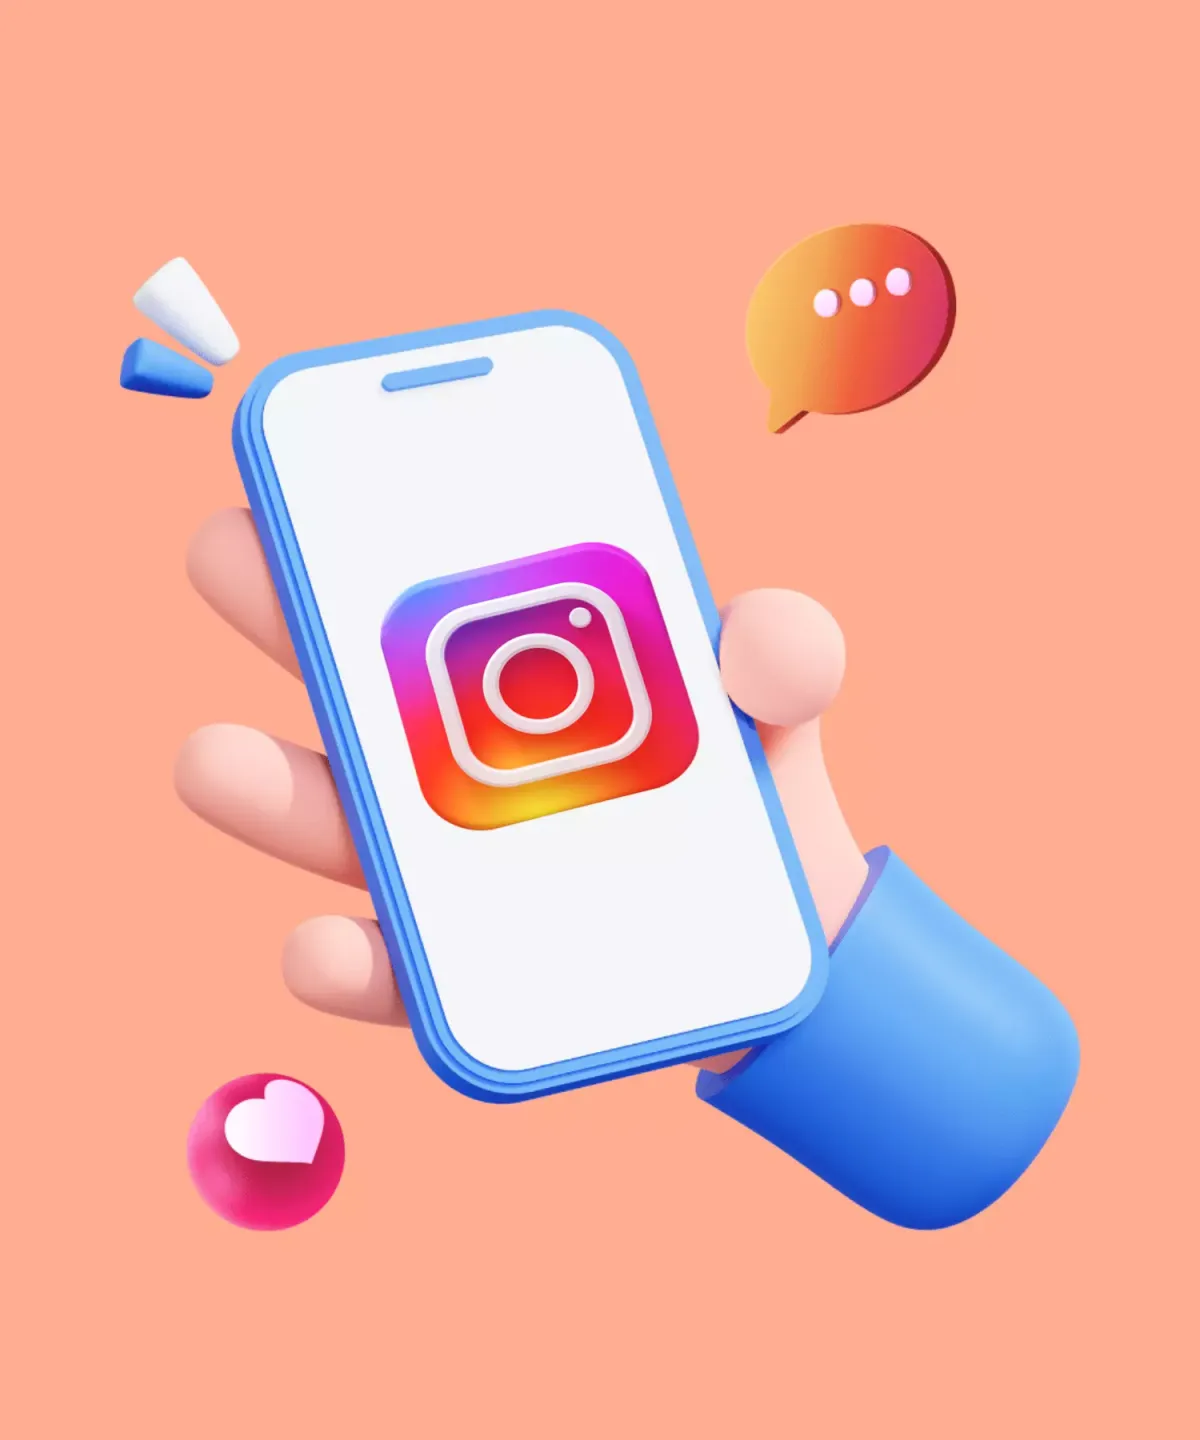 How to Make an App Like Instagram: Features, Cost and More